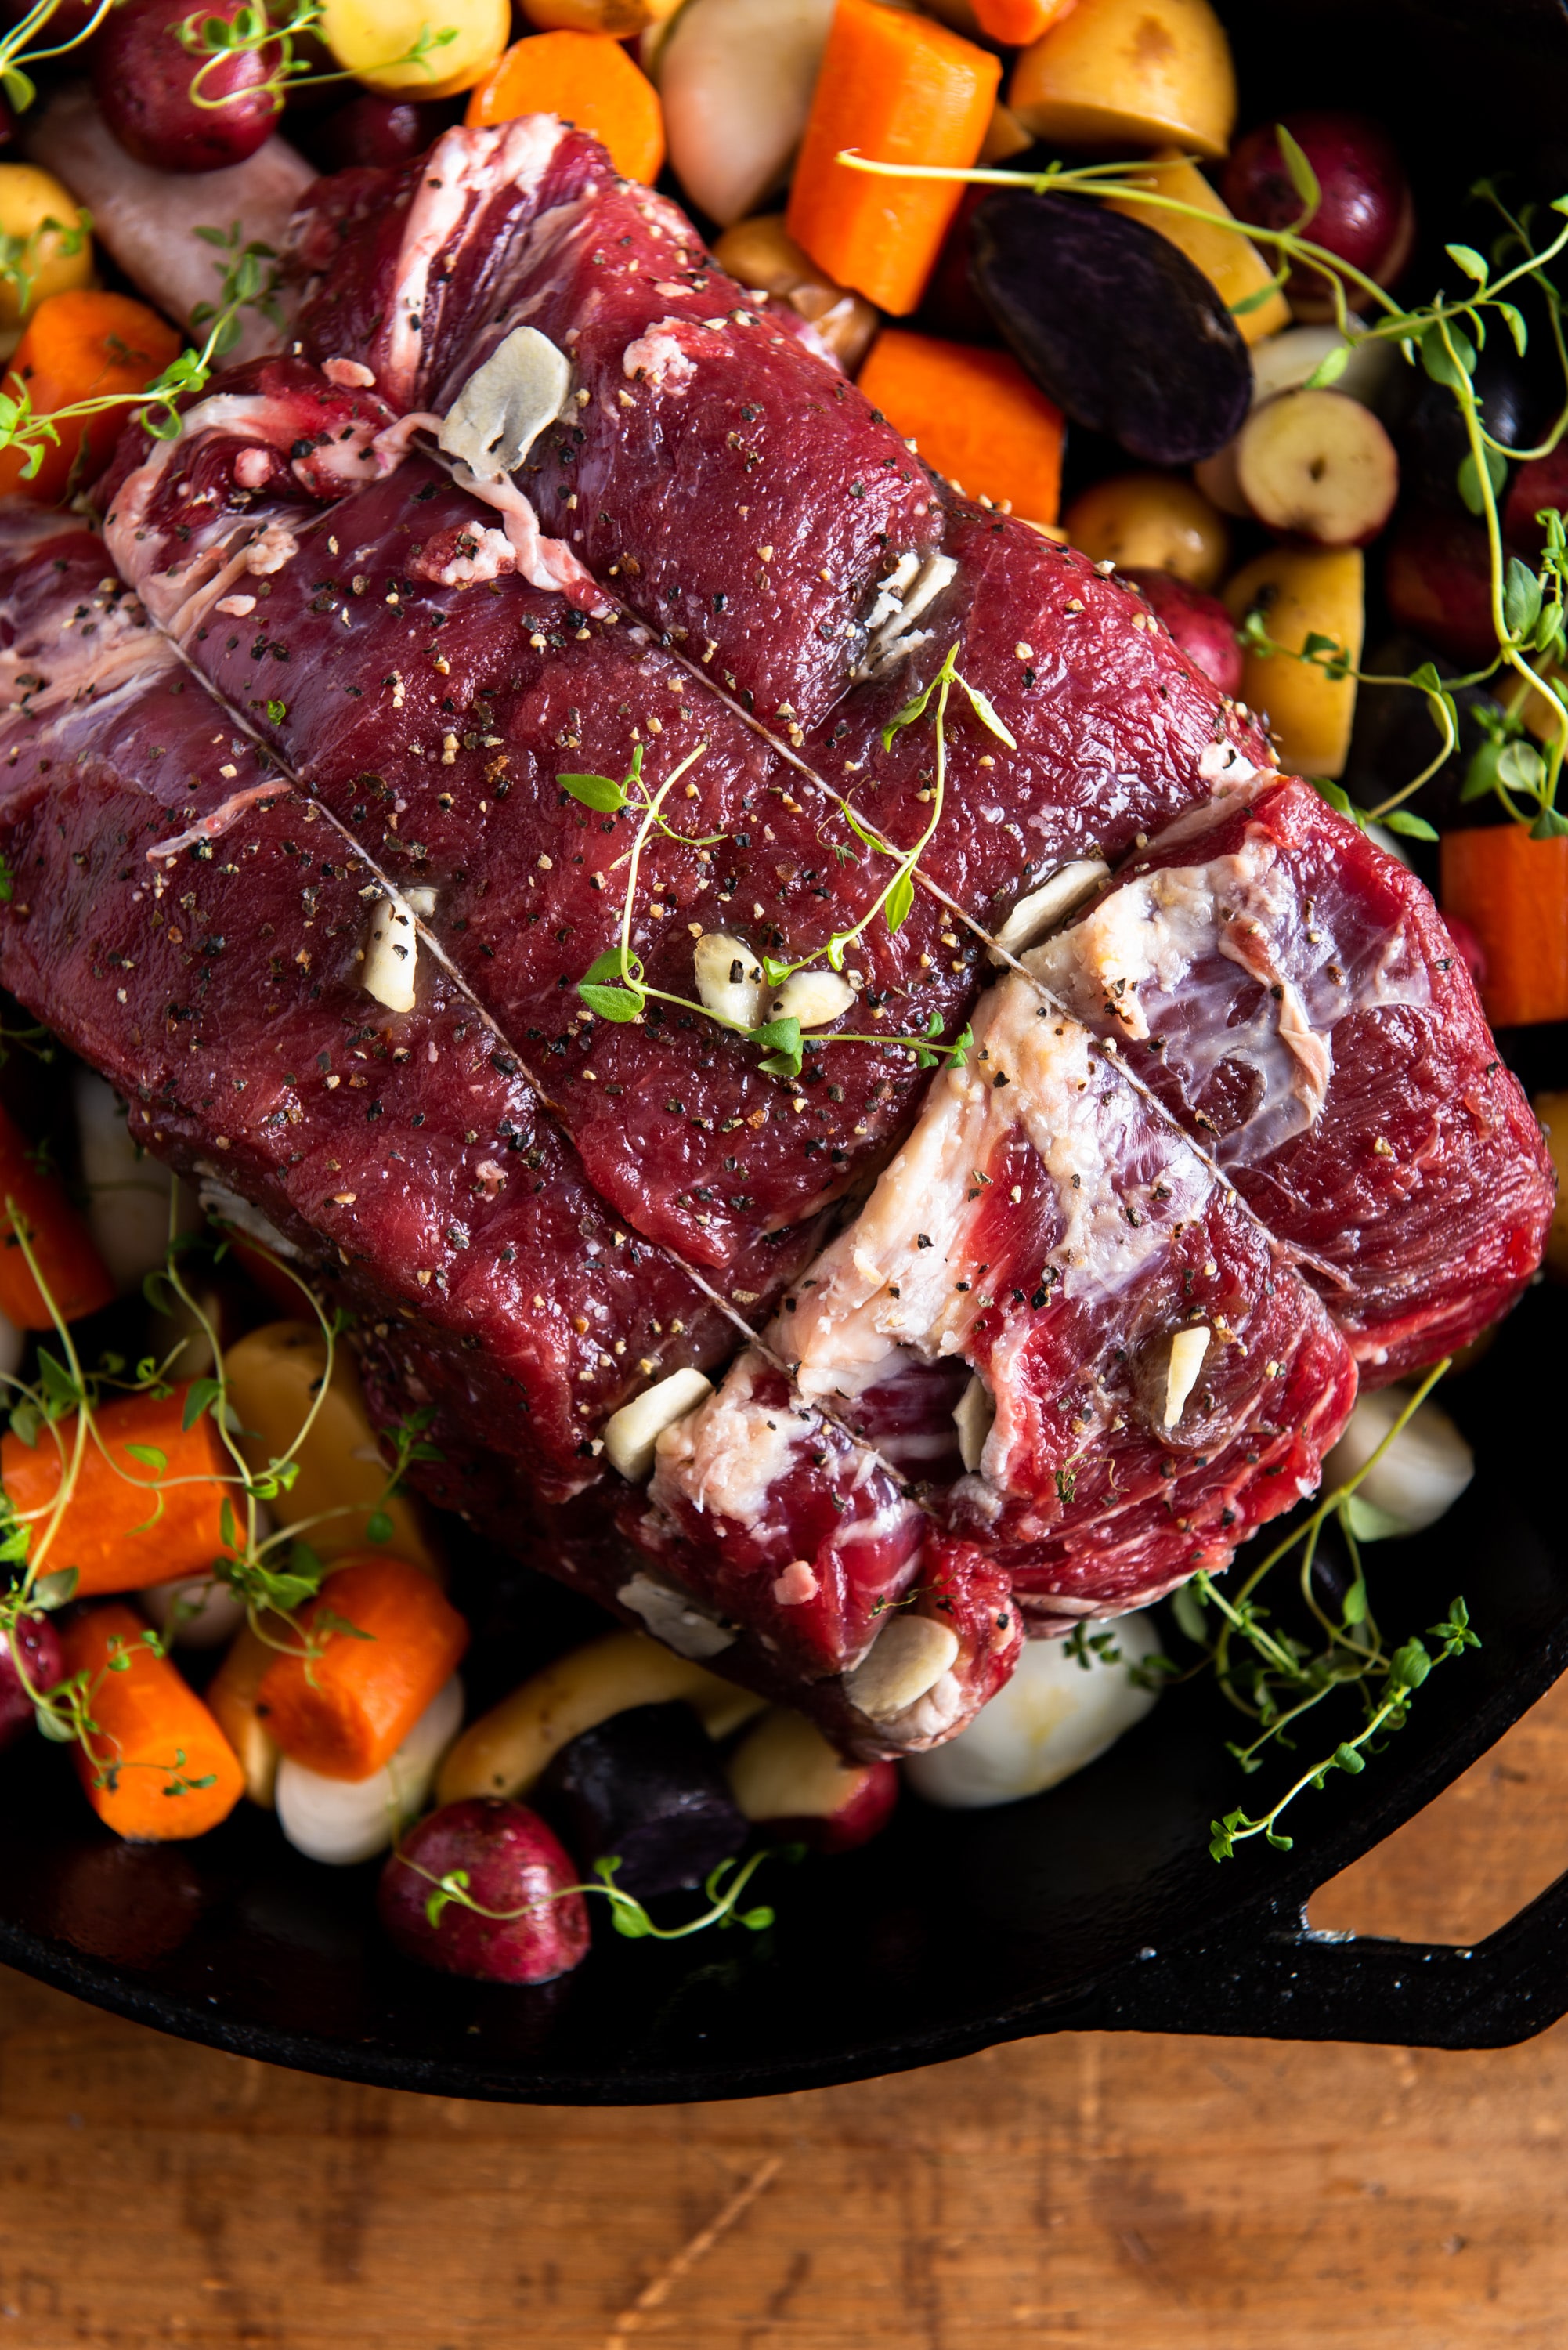 Uncooked standing rib roast with vegetables.